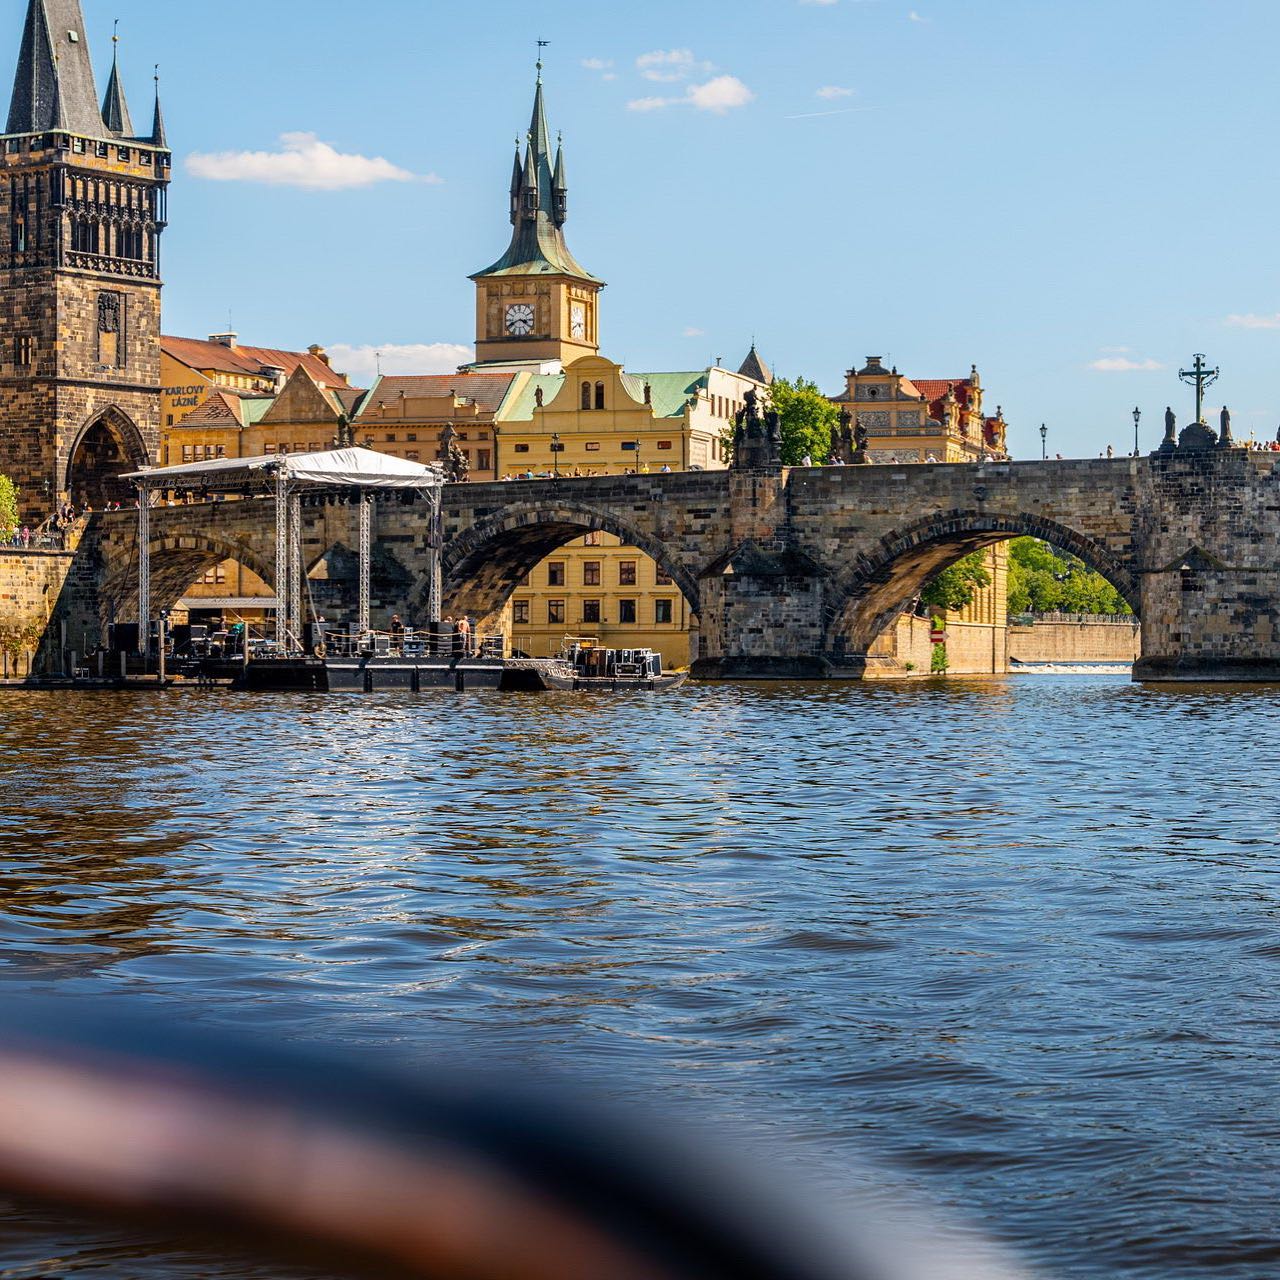 Aboard on our pontoon boat is Charles Bridge